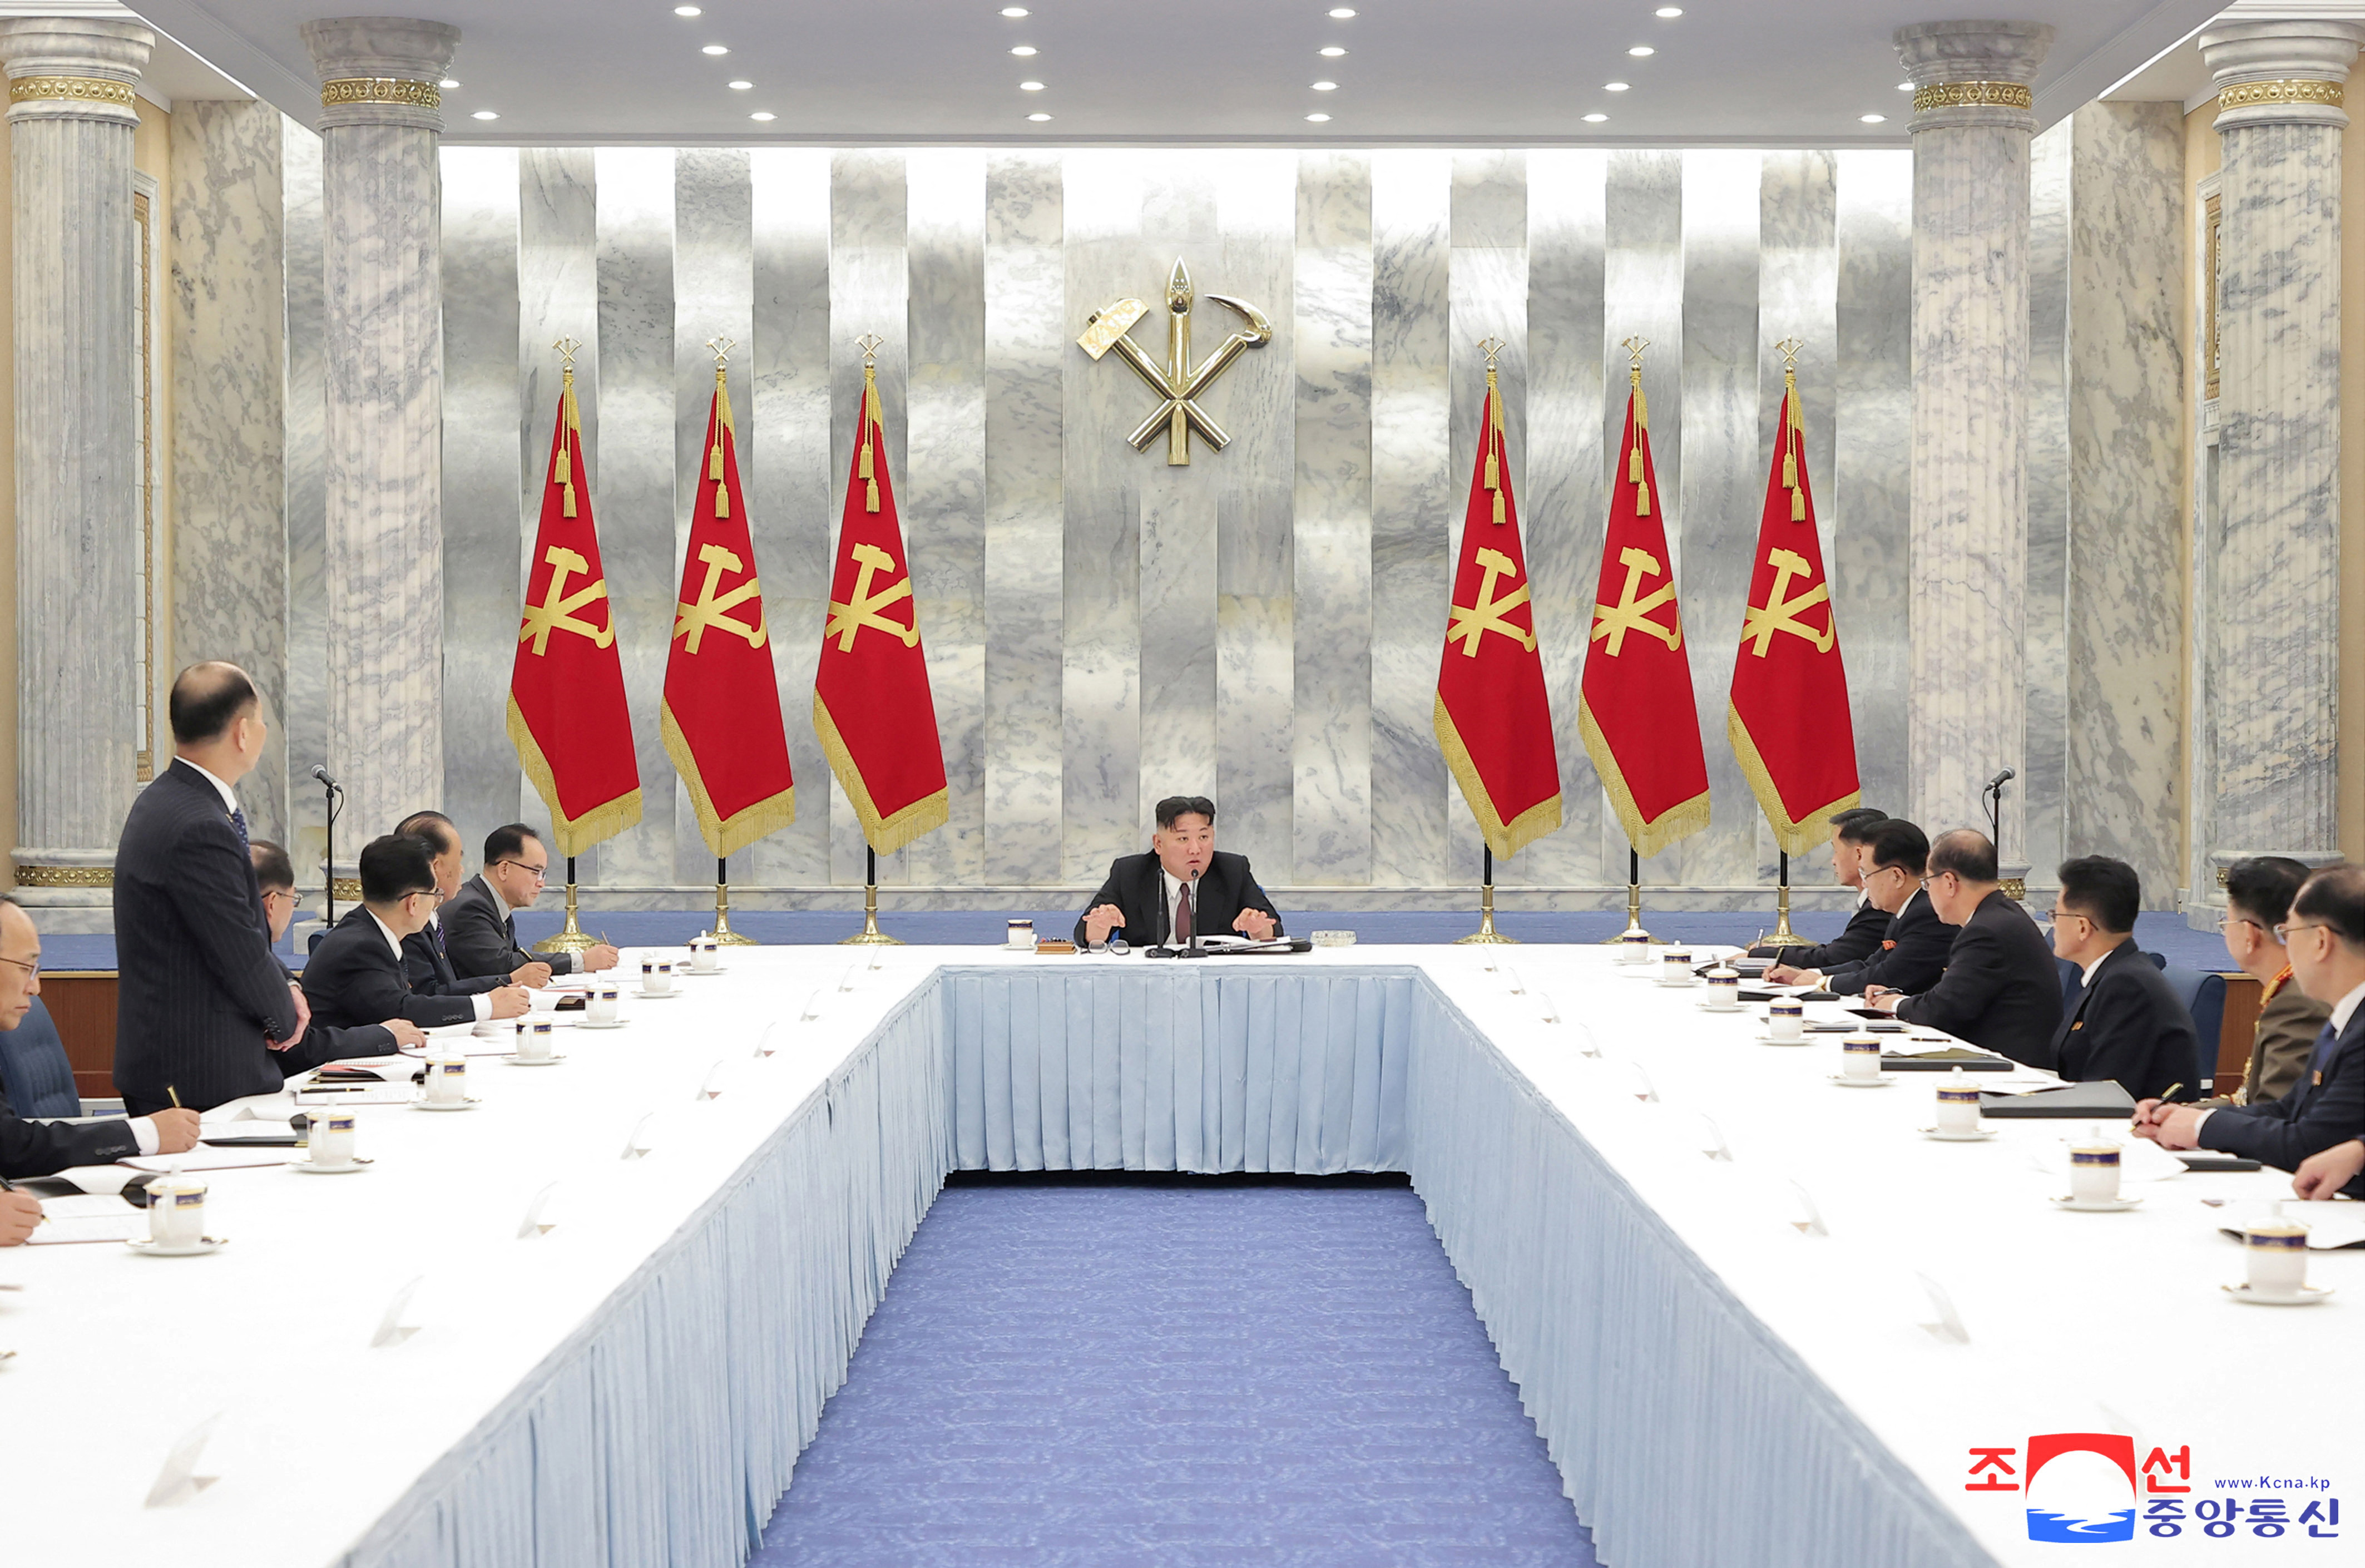 North Korean dictator Kim Jong-un attends the 8th Central Committee of the Workers' Party of Korea (WCP) in Pyongyang, North Korea, in this Dec. 31, 2022 photo released by the North's Korean Central News Agency (KCNA).